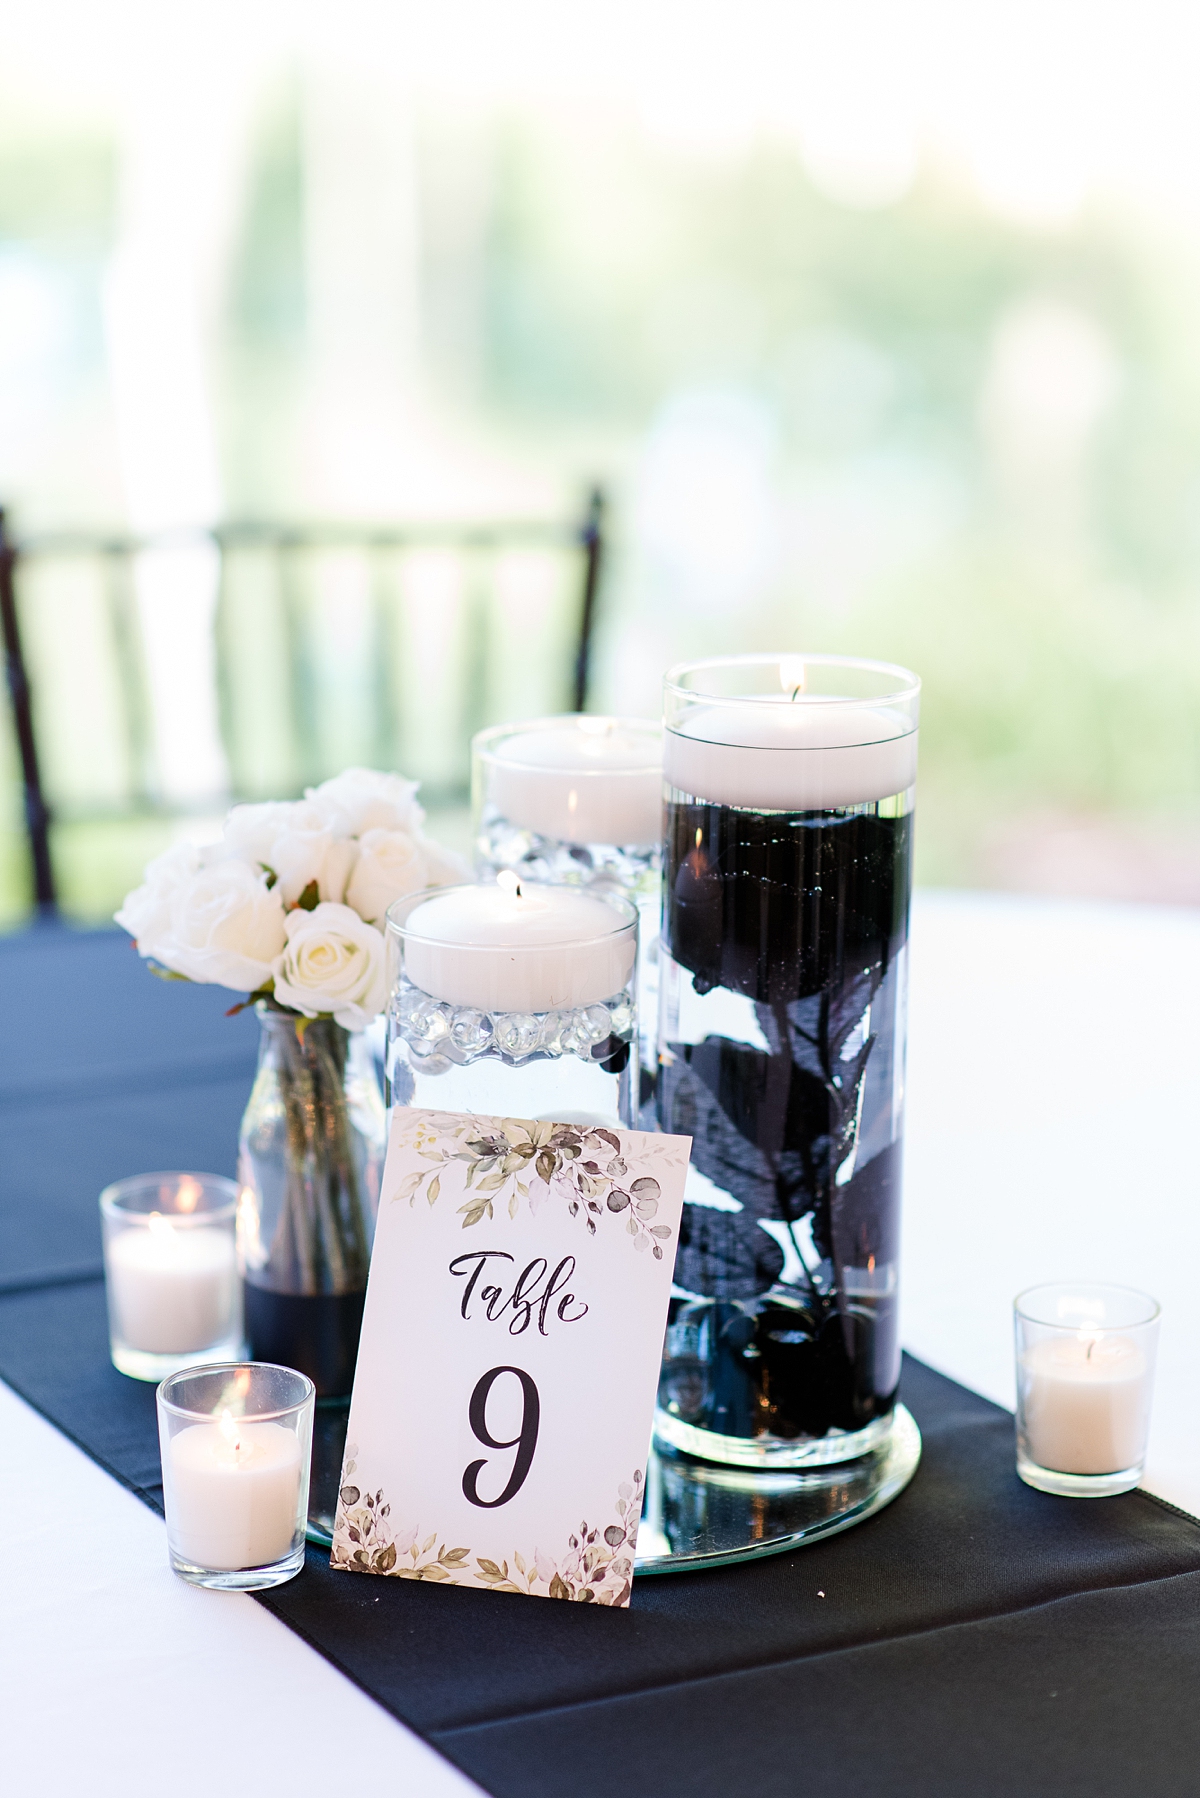 Black and White Floating Candle Centerpieces at Virginia Cliffe Inn Summer Wedding Reception. Wedding Photography by Virginia Wedding Photographer Kailey Brianne Photography. 